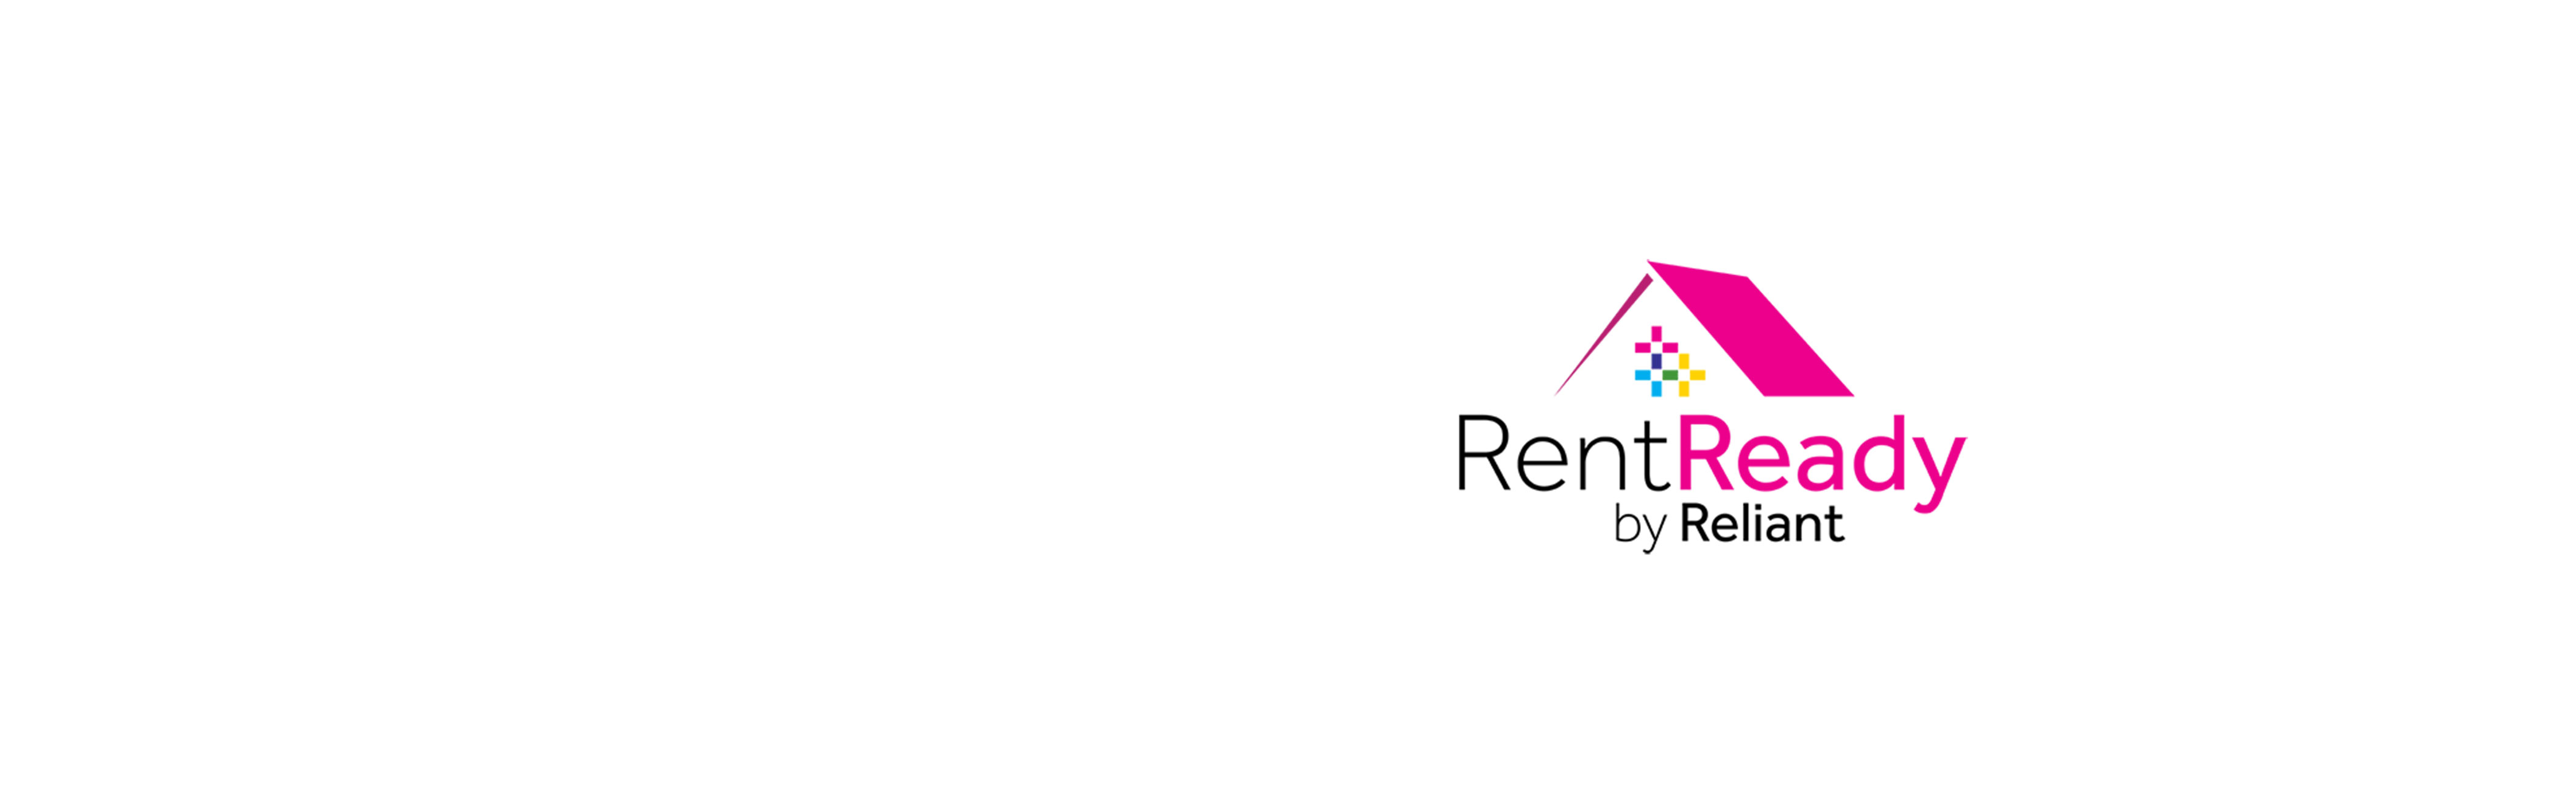 Protect your place with renters insurance
